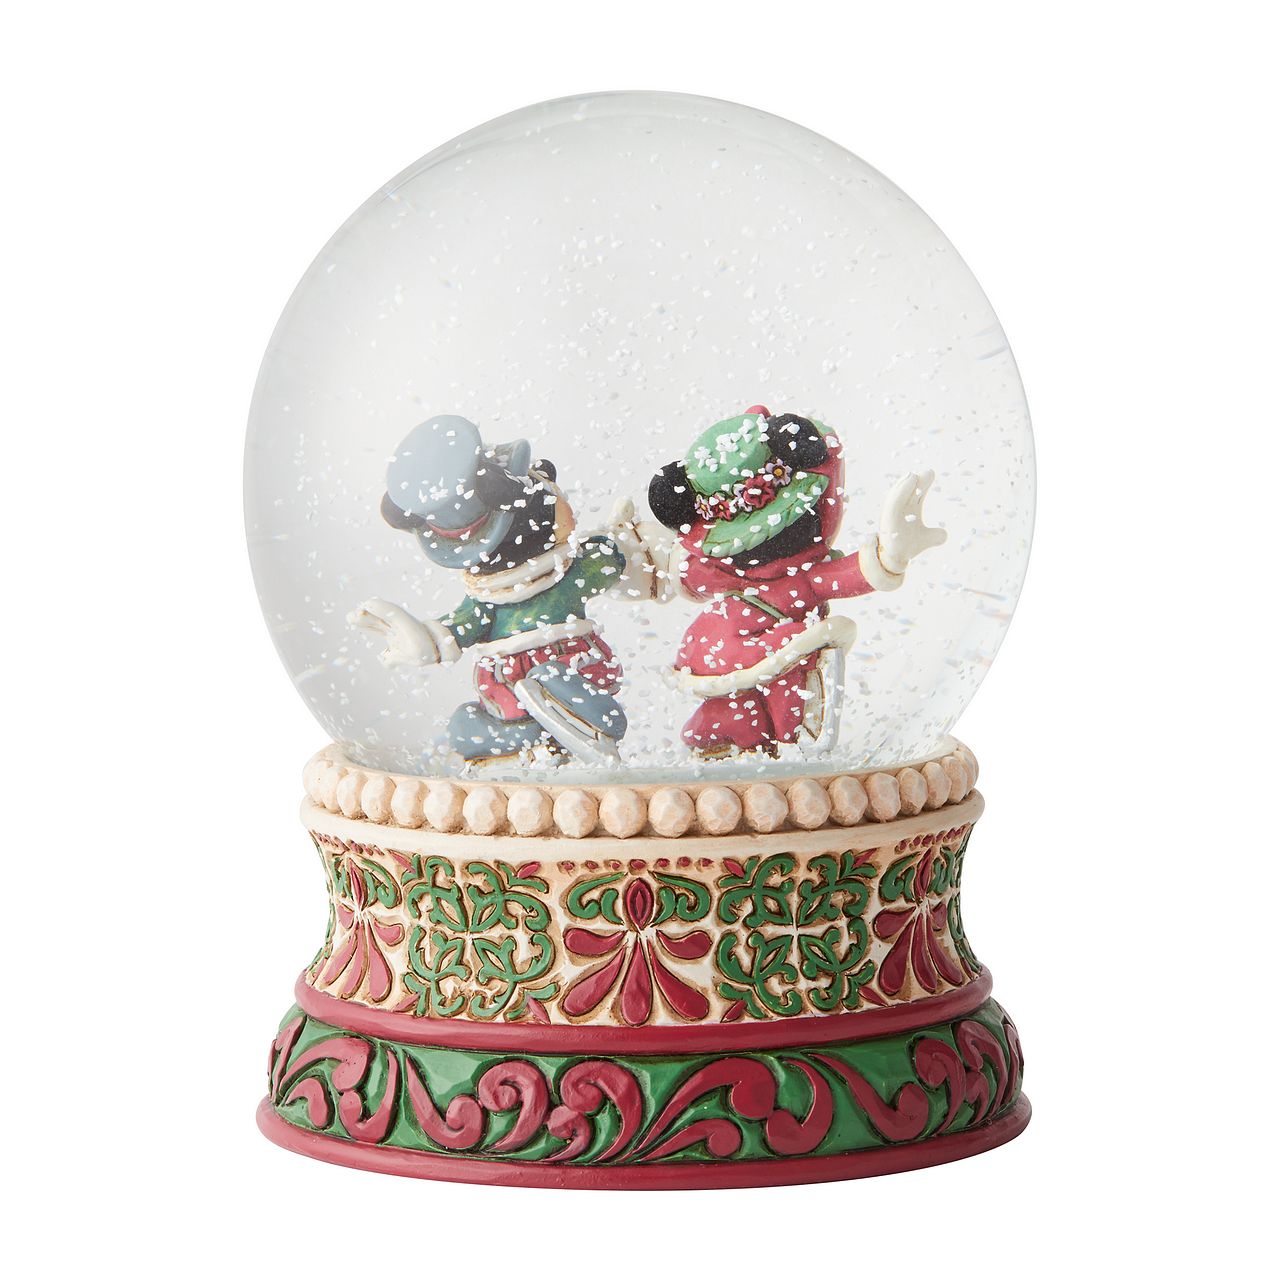 Jim Shore Splendid Skaters - Victorian Mickey and Minnie Mouse Waterball  Mickey and Minnie Mouse are filled with Christmas spirit as they ice skate in this victorian inspired waterball. Unique variations should be expected as this product is hand painted.